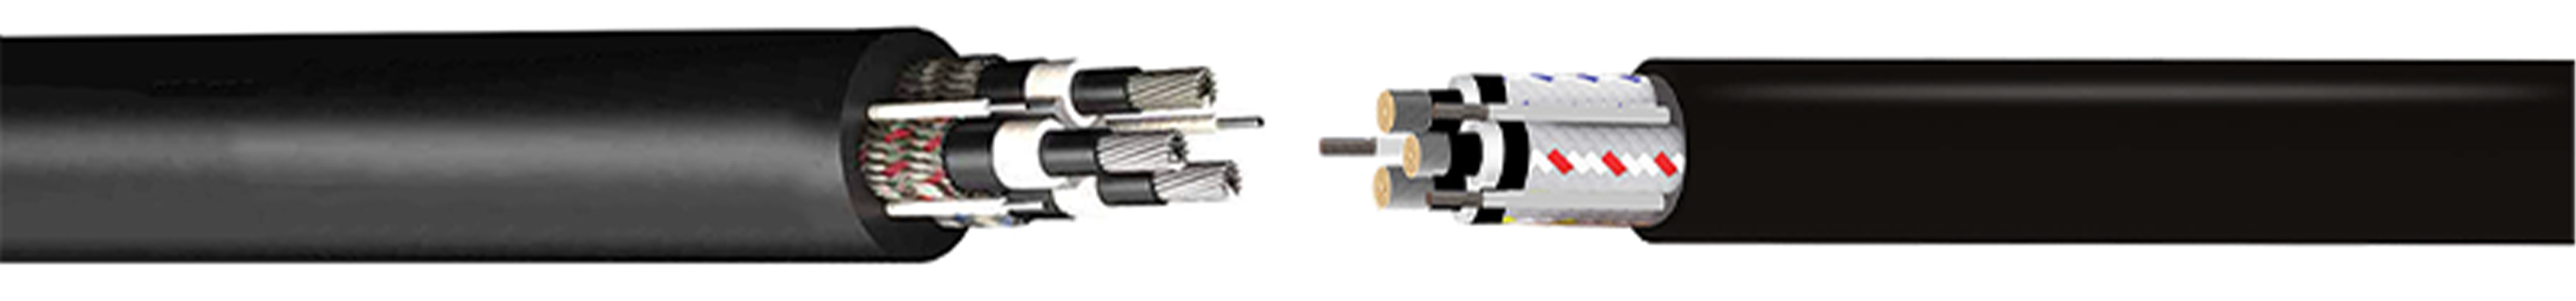 TYPE-240-MINING-CABLES-AS-NZS-1802